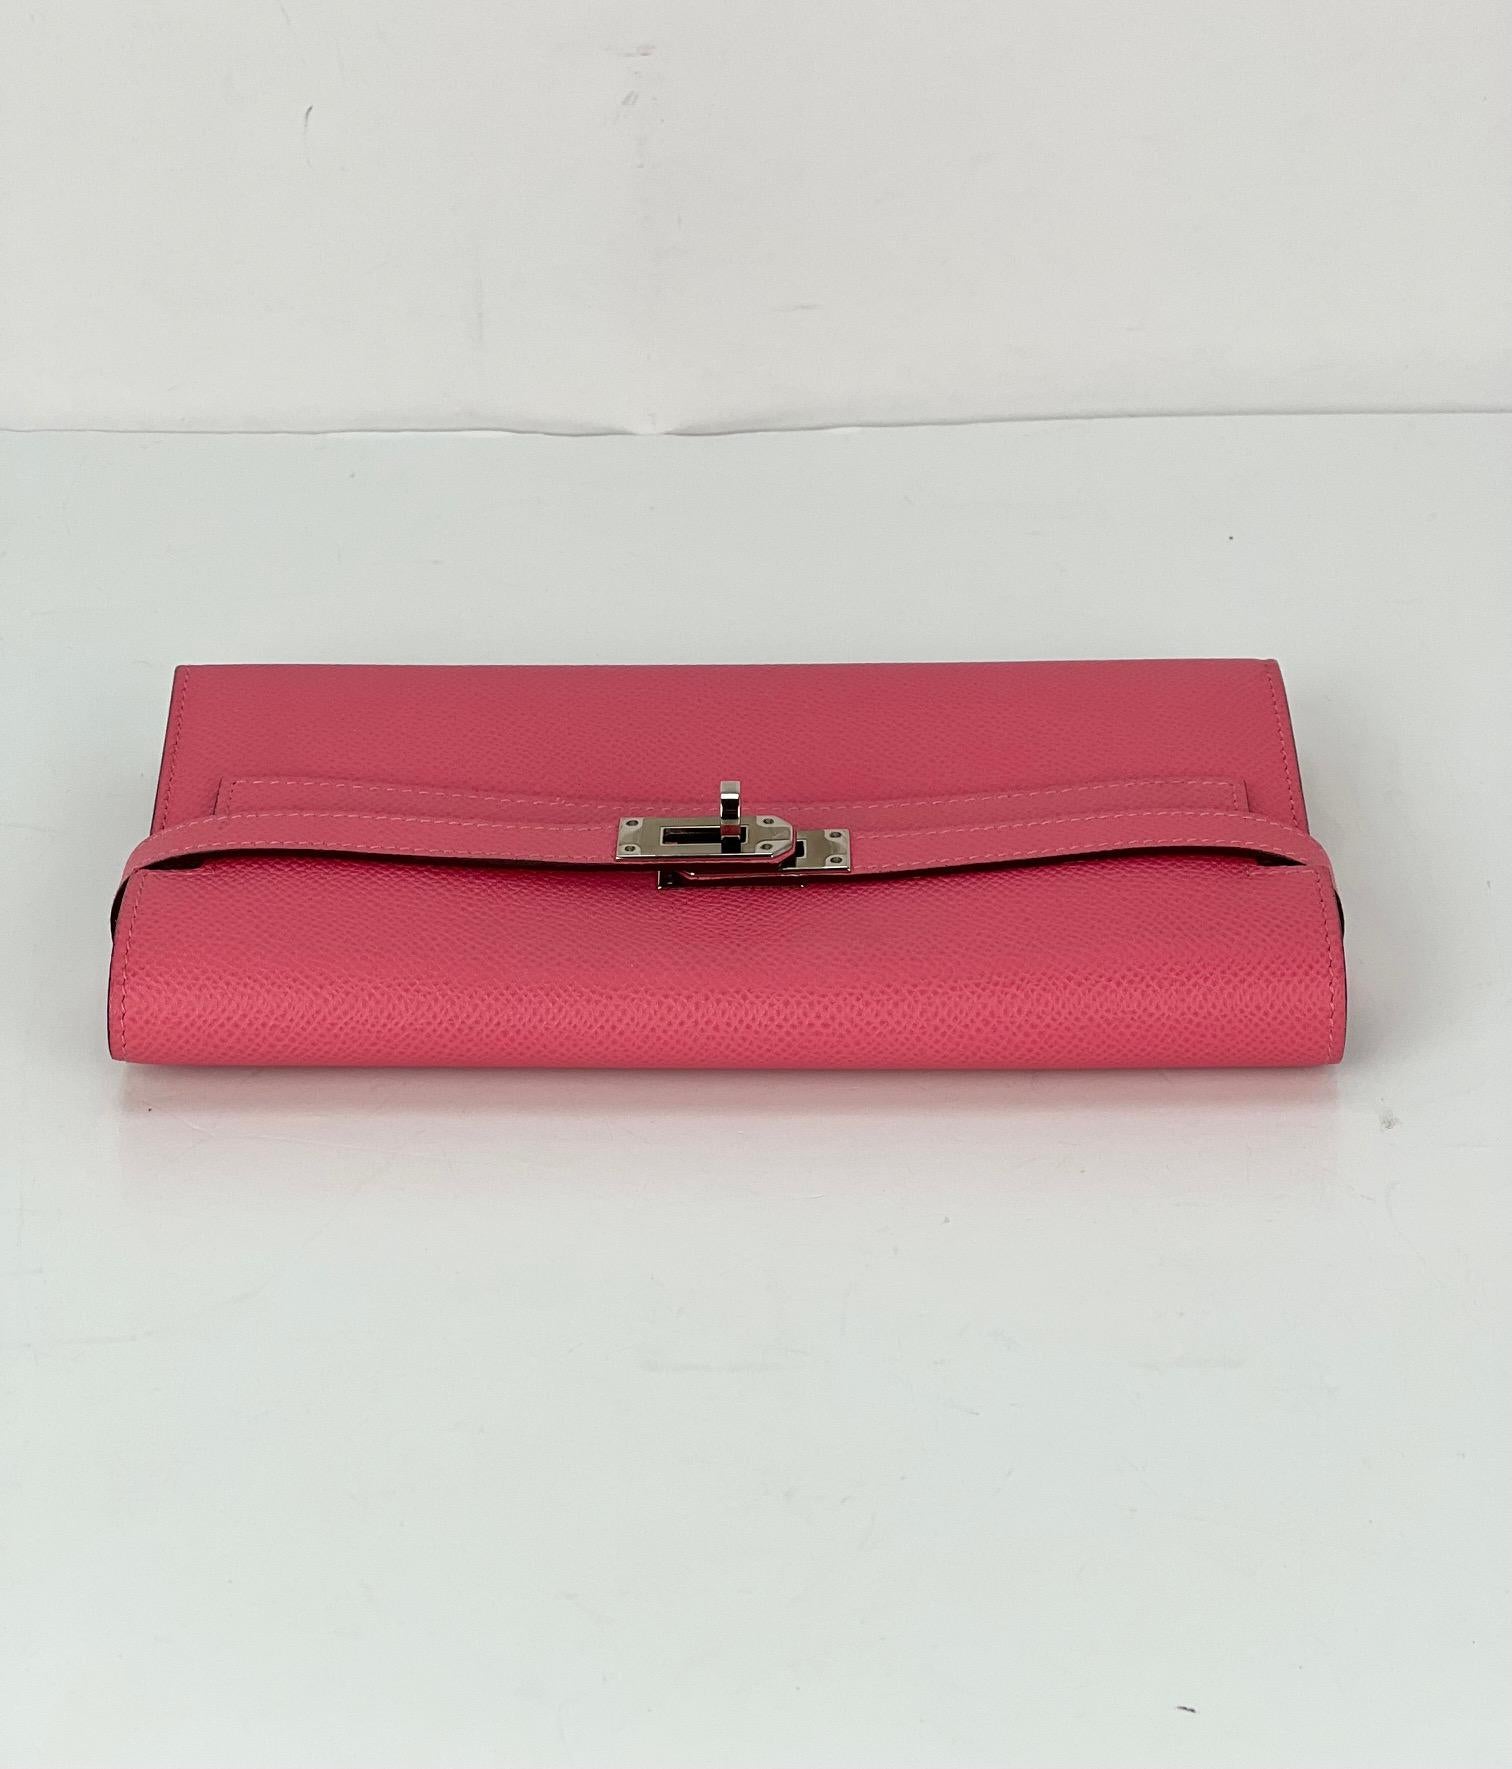 Pre-Owned  100% Authentic
HERMES Epsom Kelly Longue Rose Azalee Wallet  
RATING: A/B...Very Good, well maintained, 
shows minor signs of wear
MATERIAL: textured calfskin leather
COLOR: rose azalee, pink  
EXTERIOR: on front of right strap has a tiny